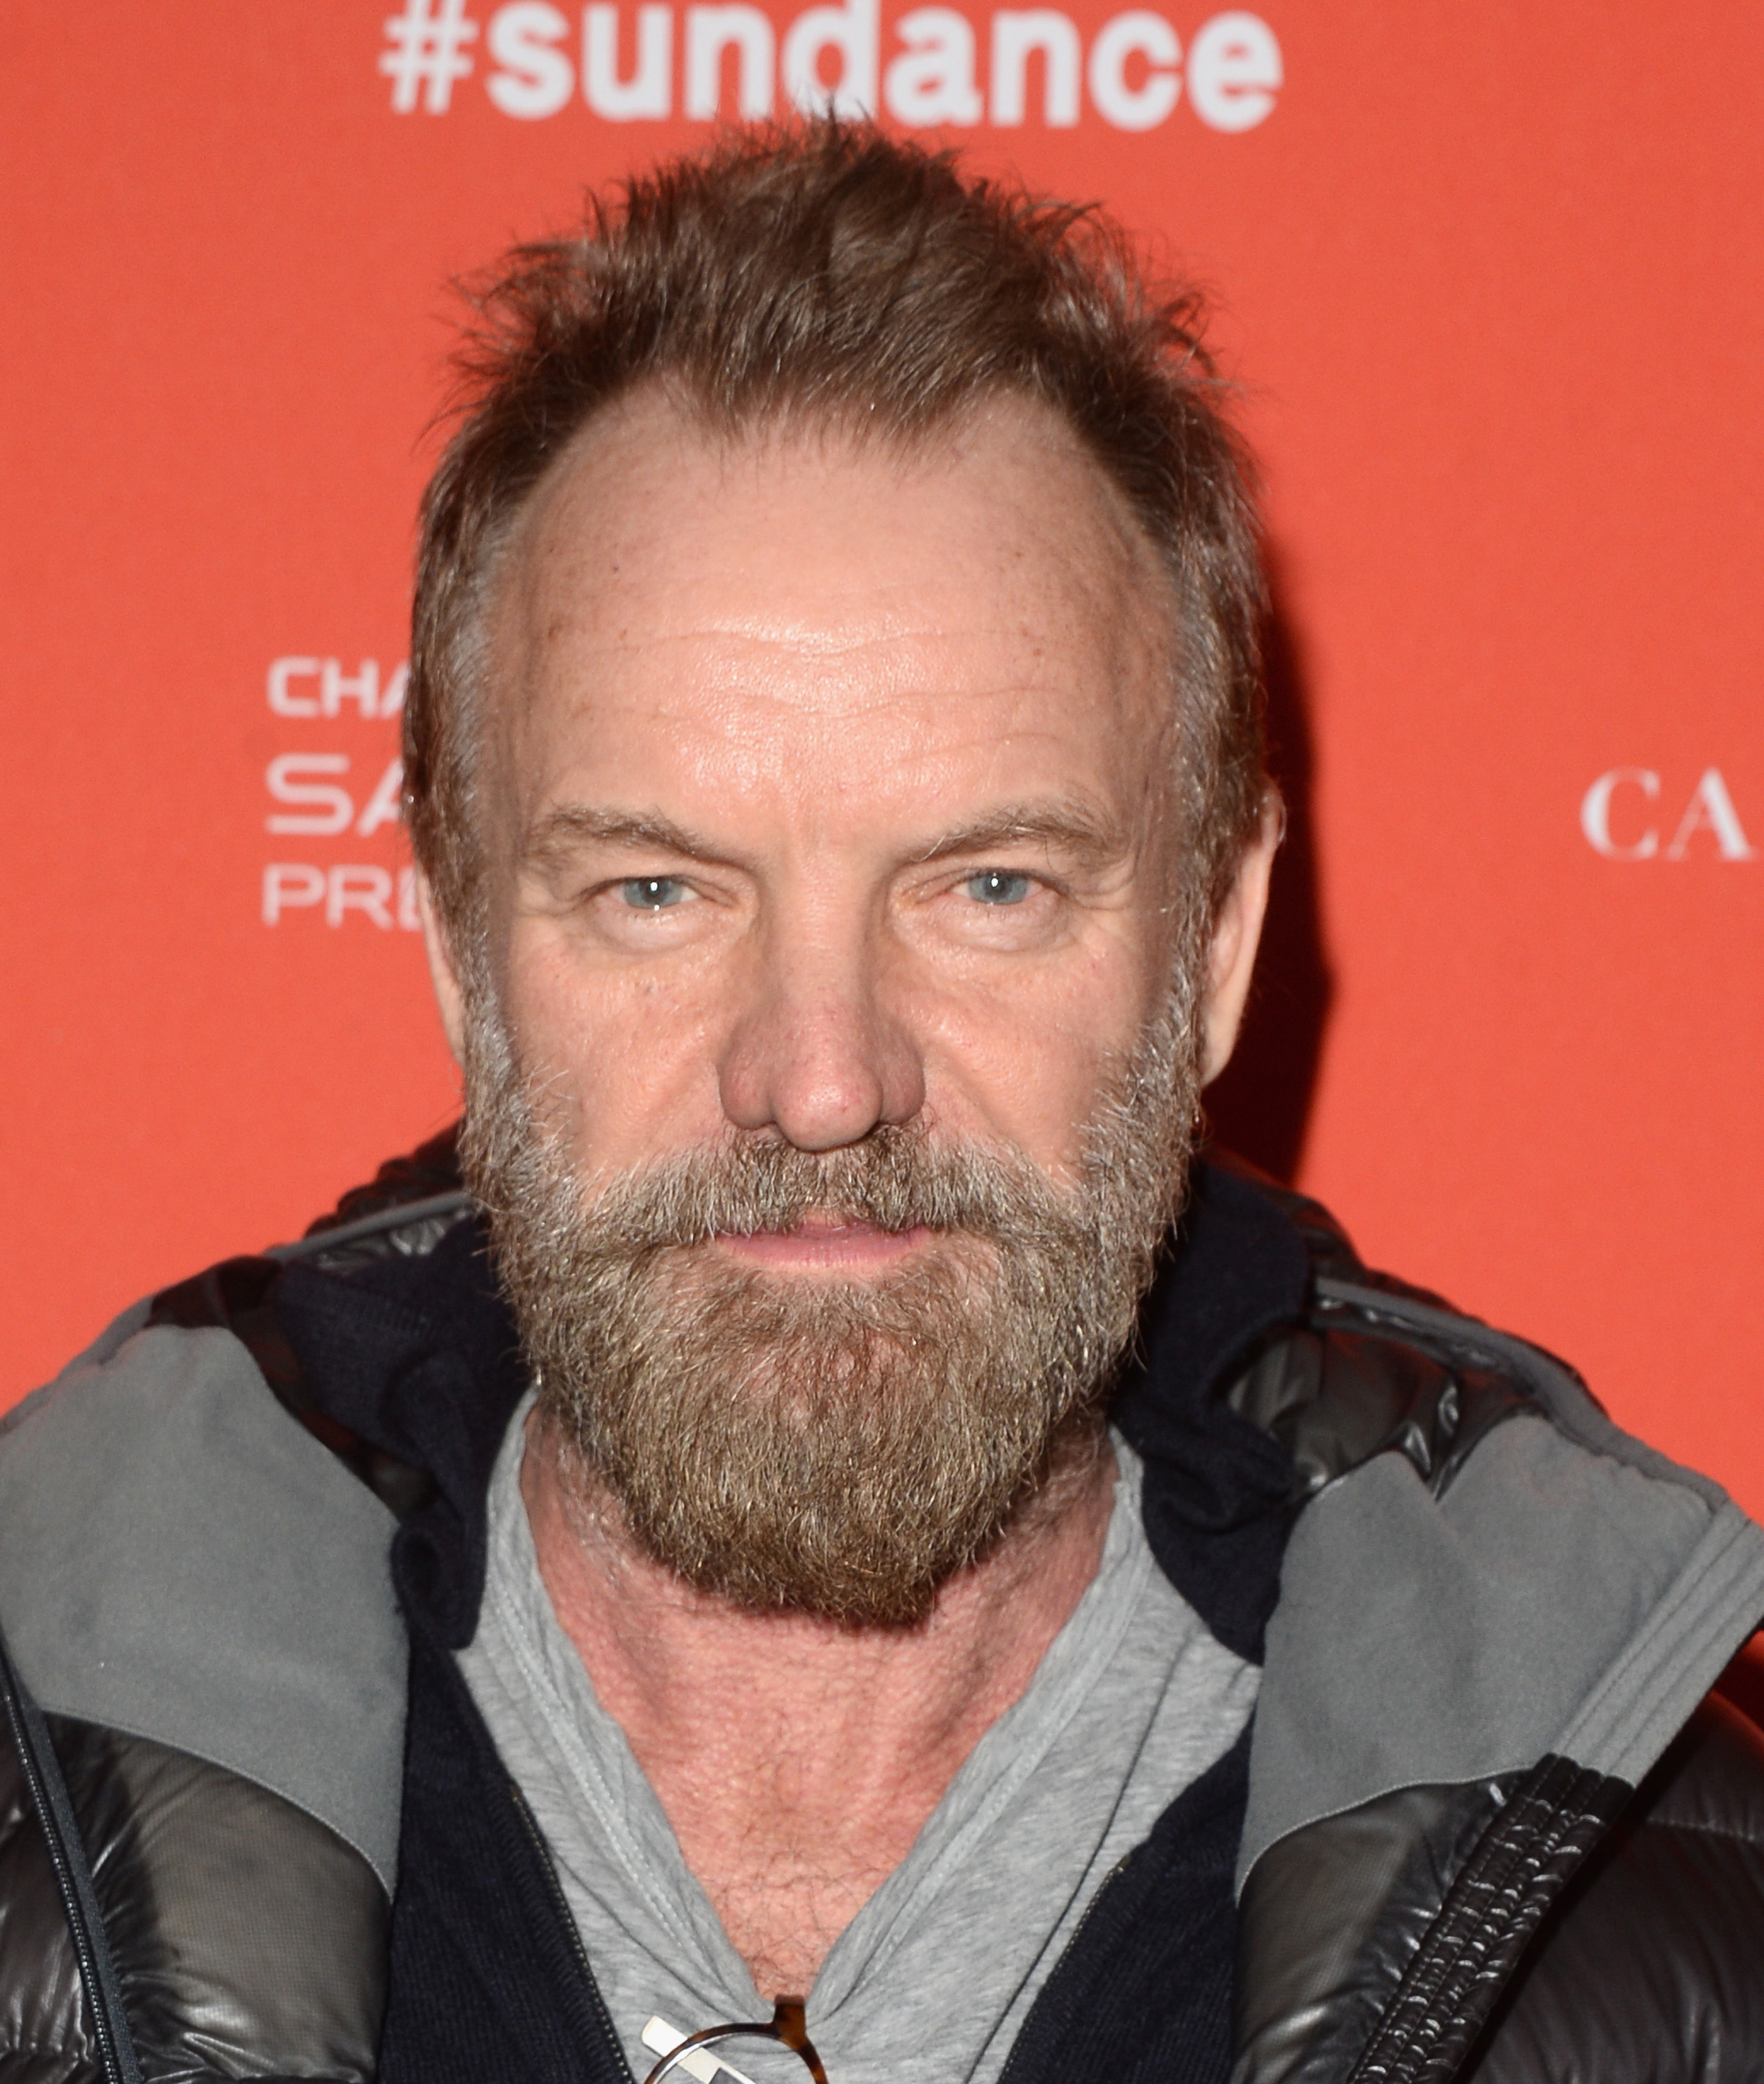 Sting to perform, receive honors at the American Music Awards CBS News